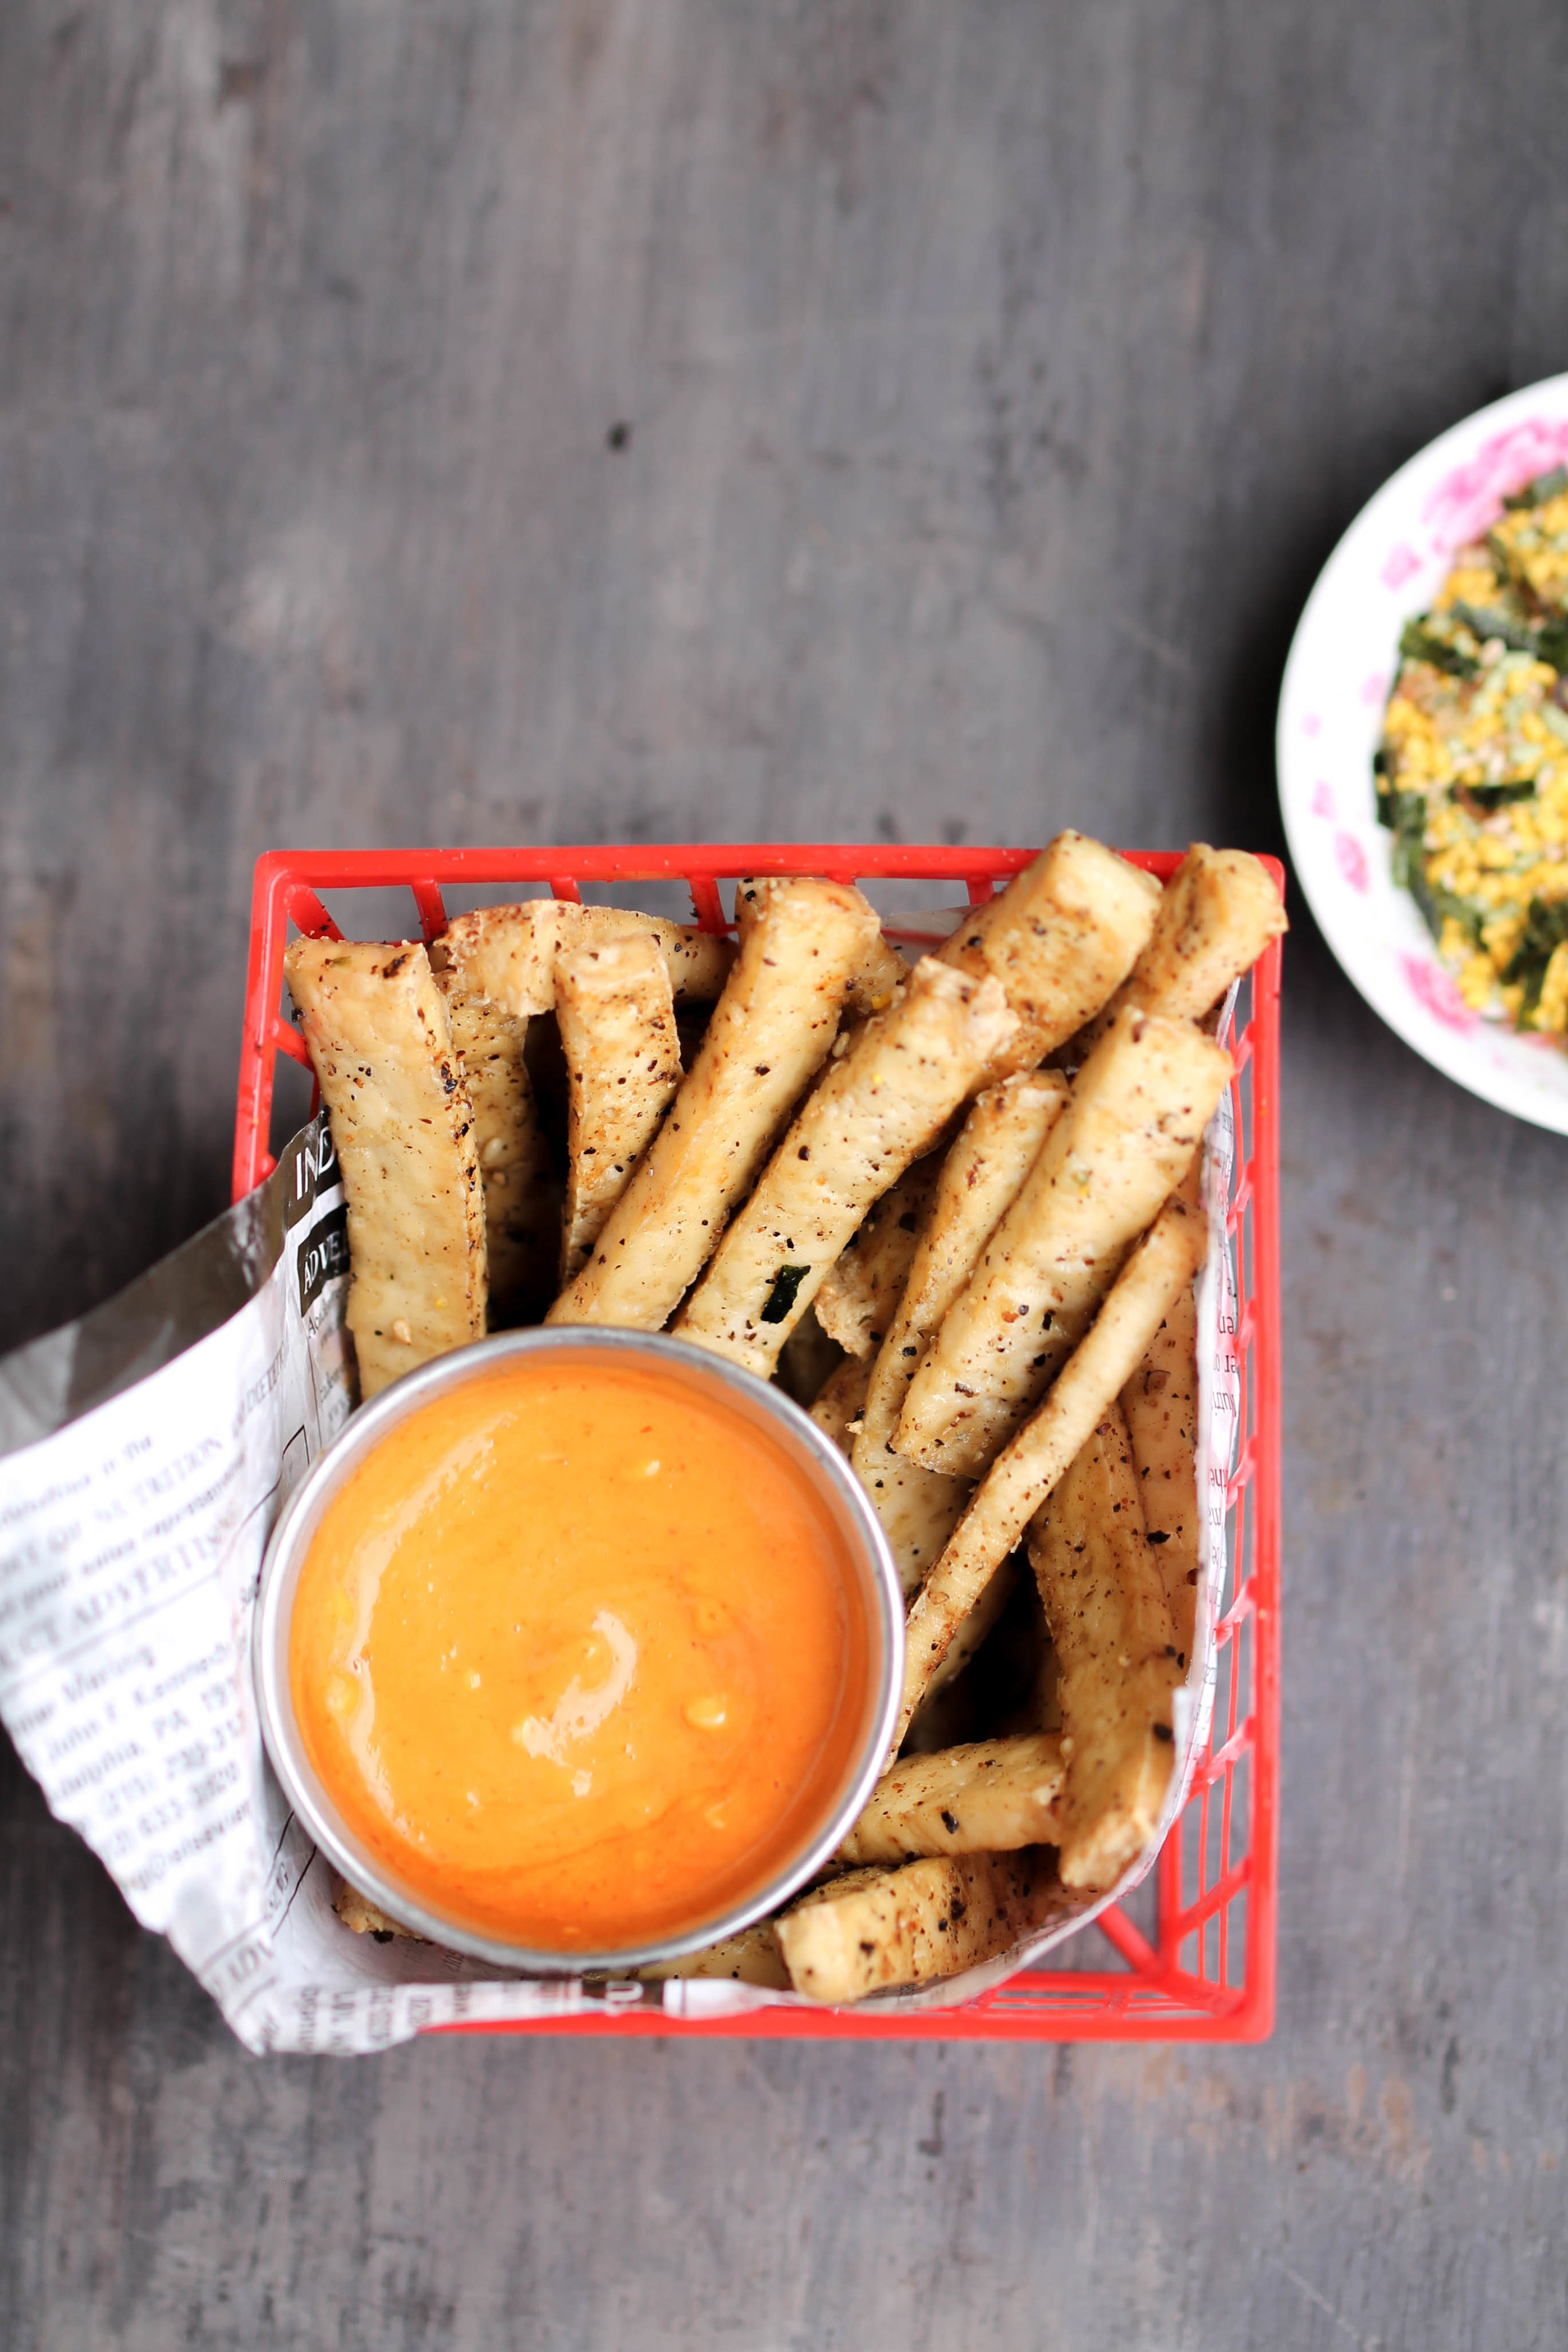 Baked Tofu Fries are naturally gluten-free, vegan, and packed with protein and many other nutrients. It's a quick, rather addictive side that you and your family can enjoy!